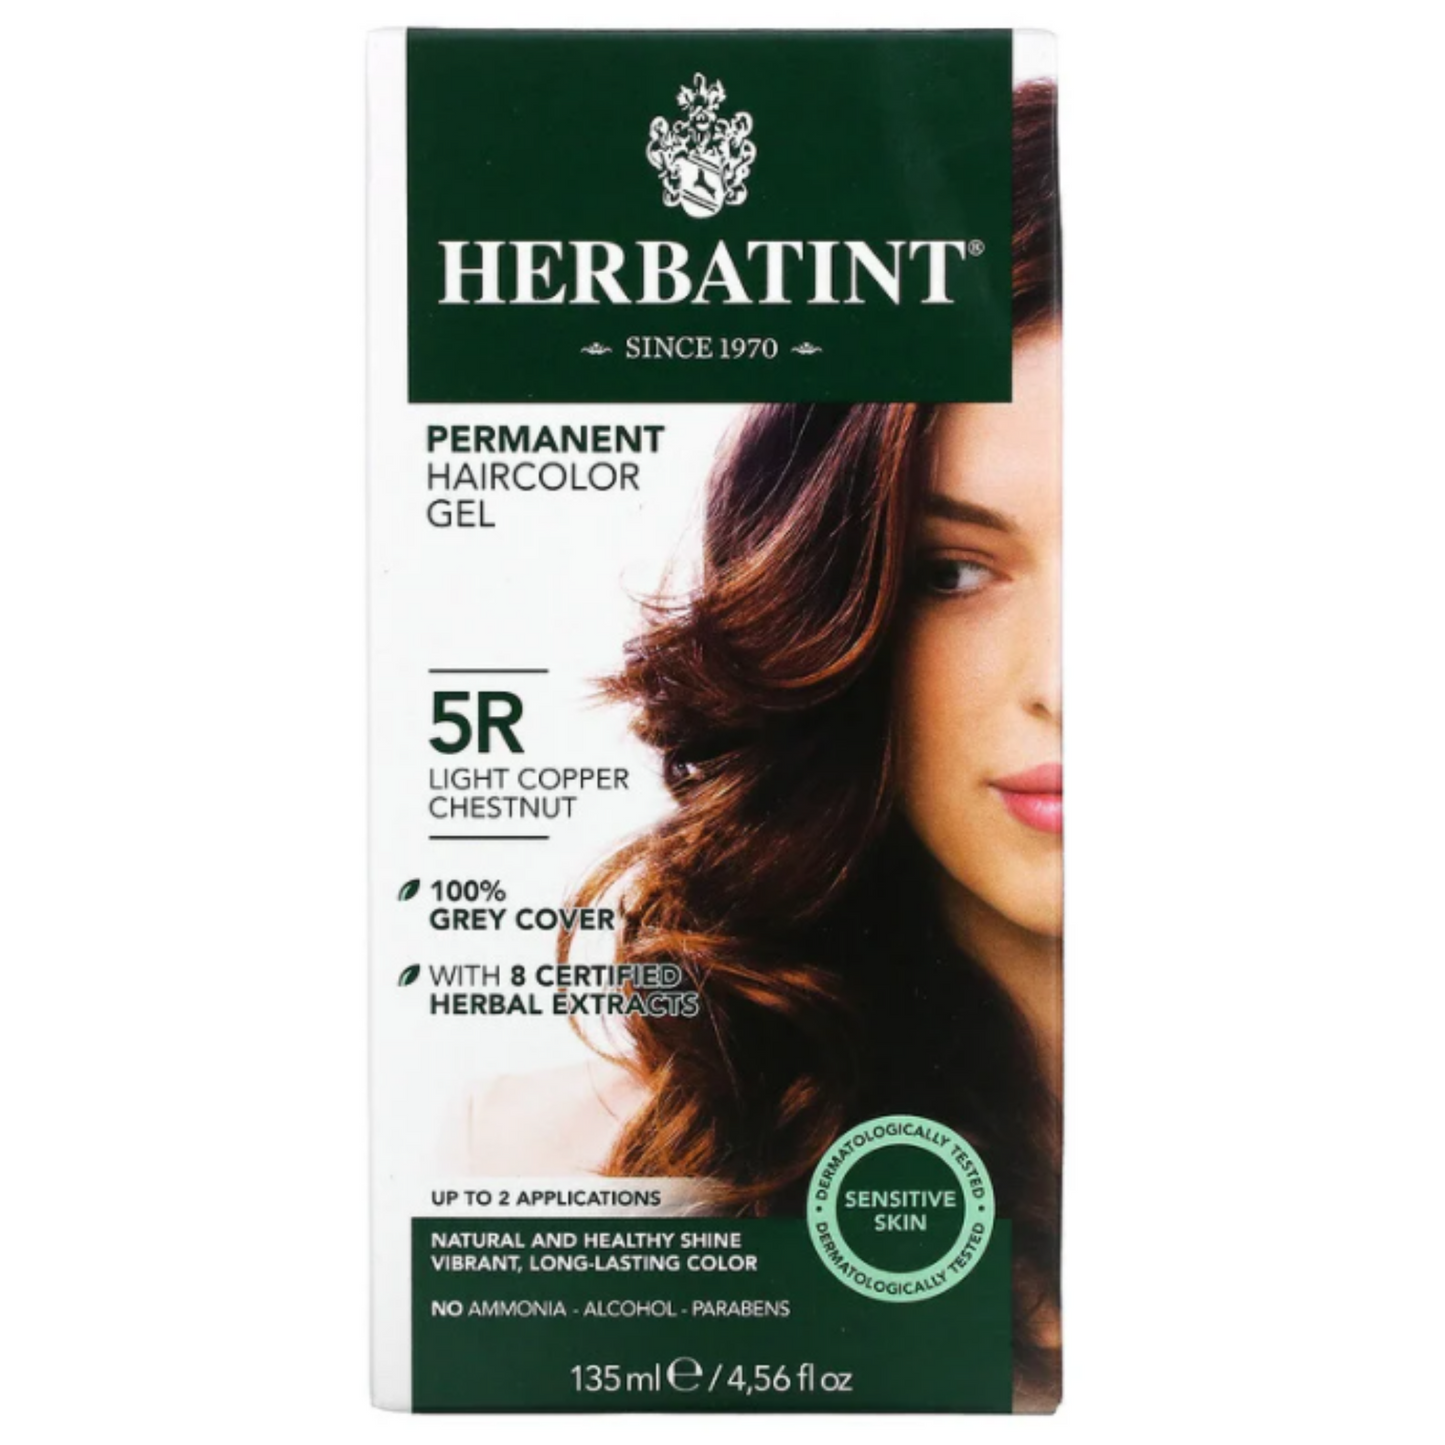 Primary image of Herbatint 5R Light Copper Chestnut Hair Color